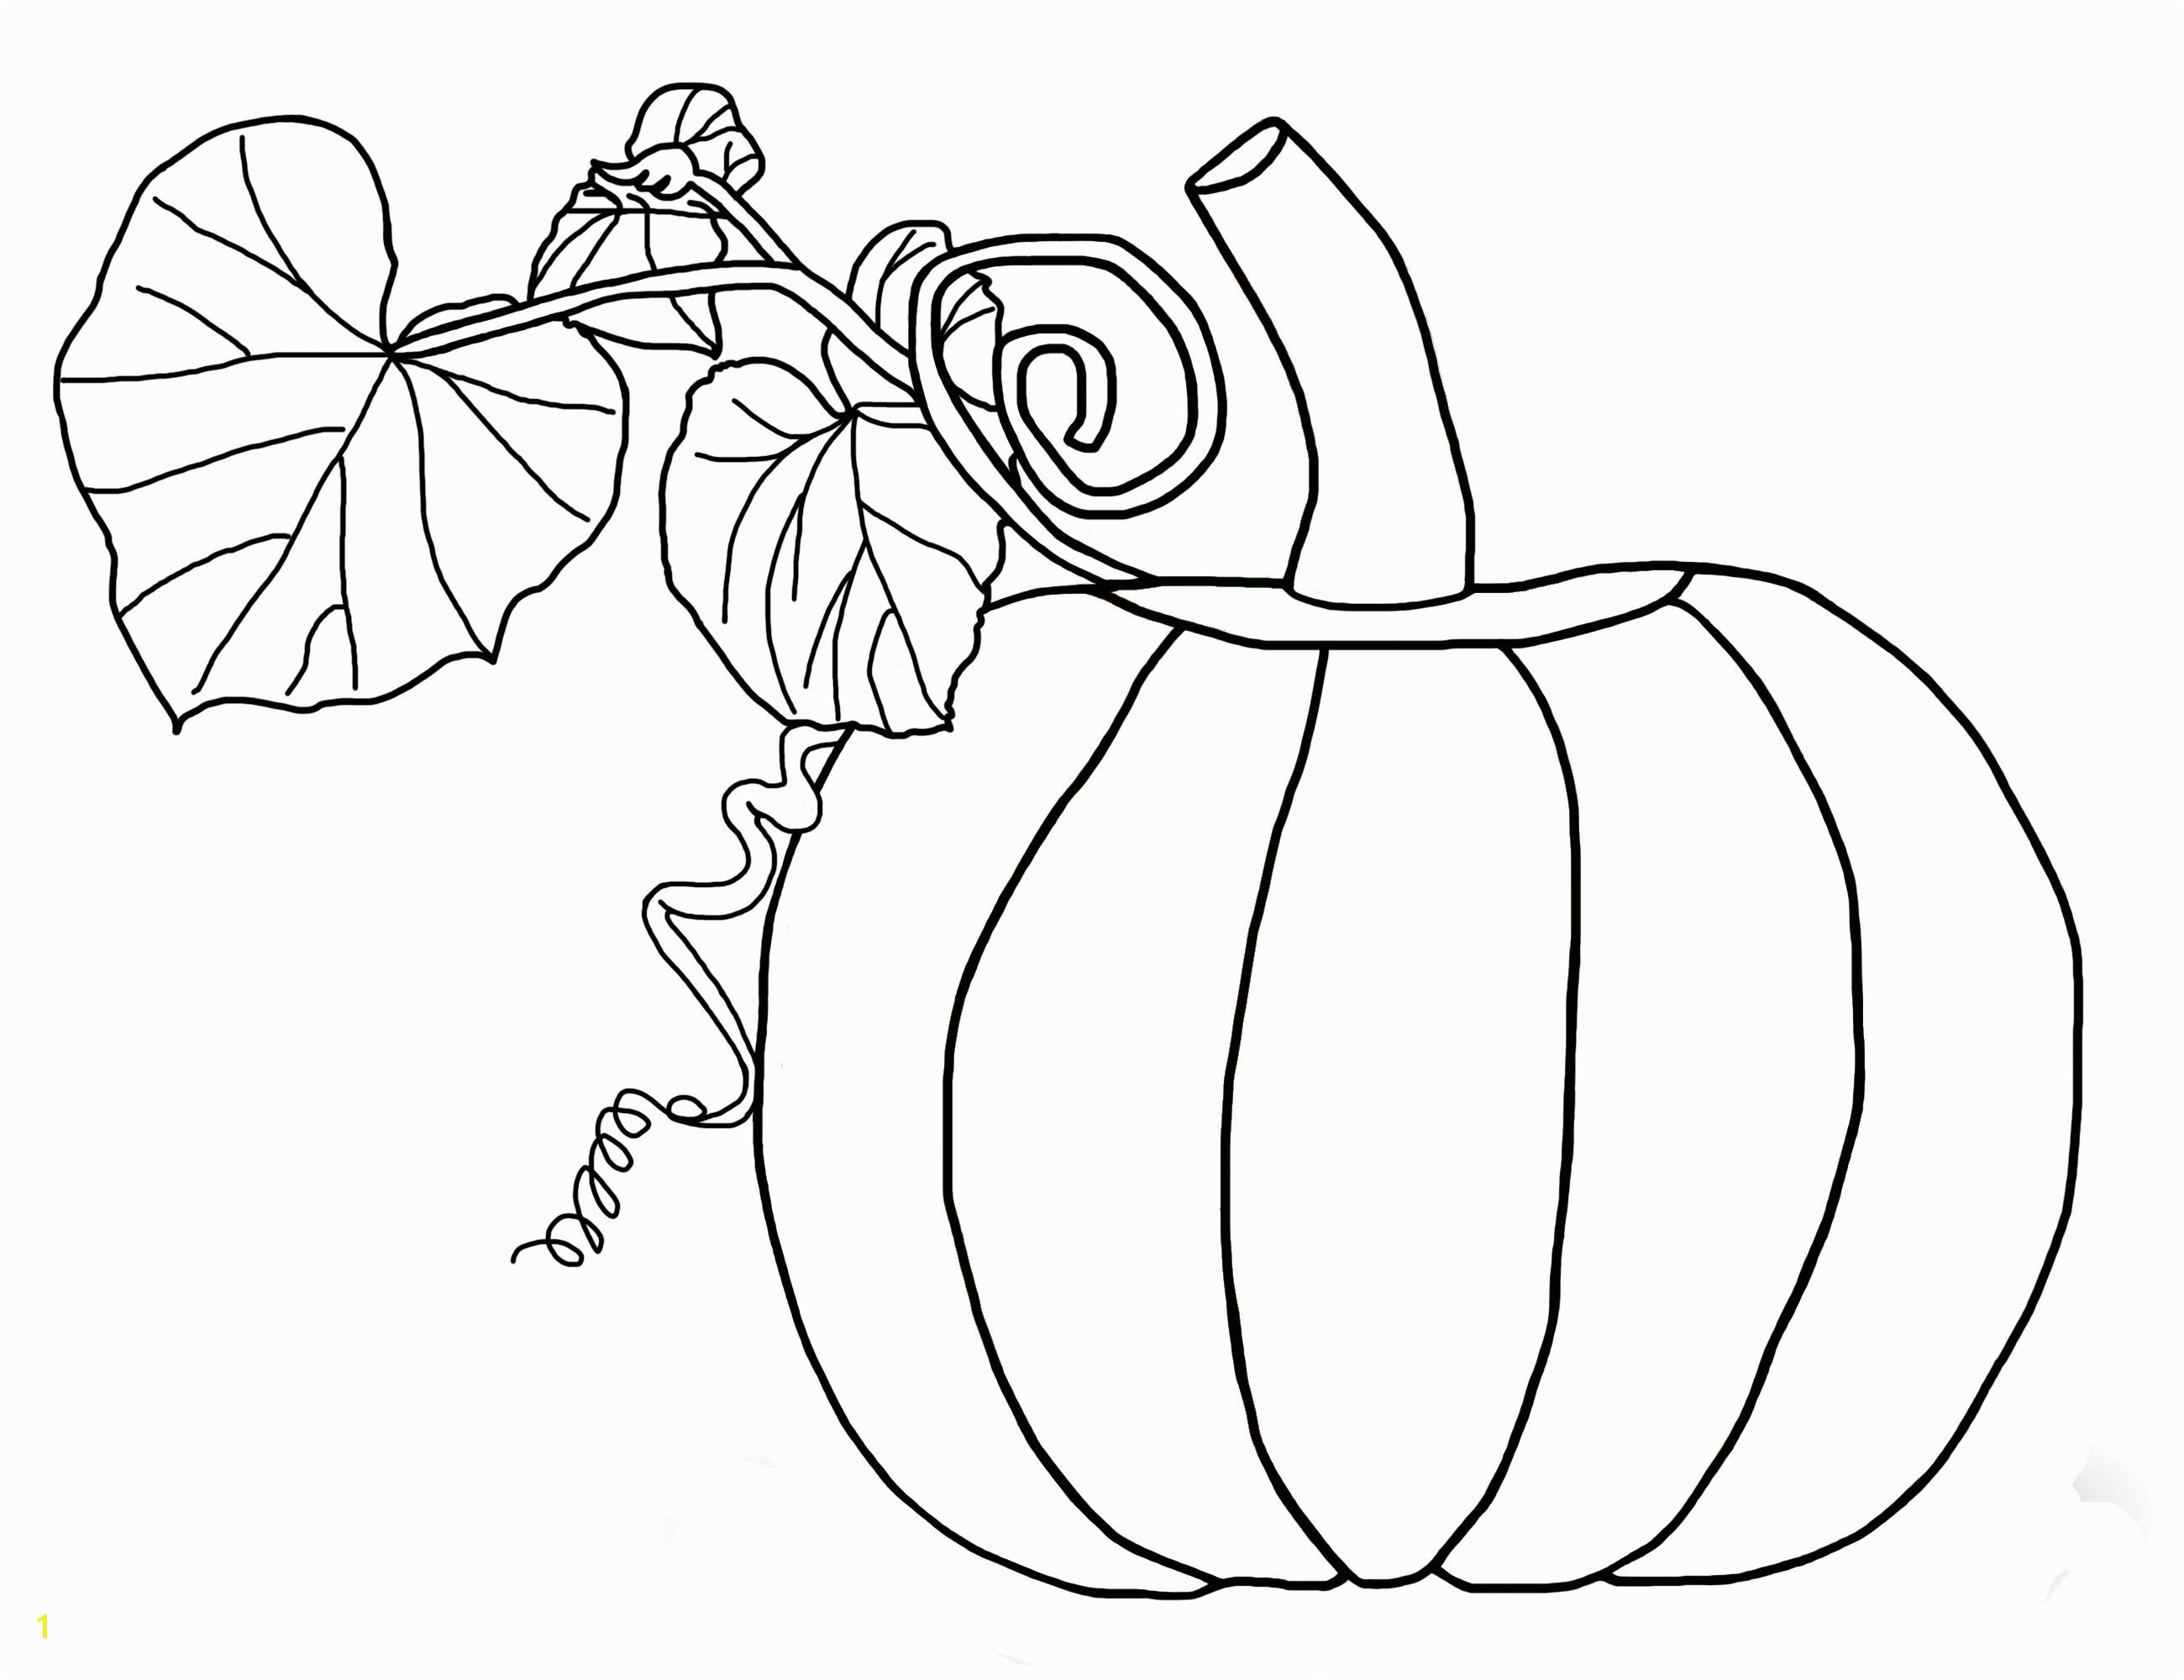 The Pumpkin And Leaves Coloring Pages